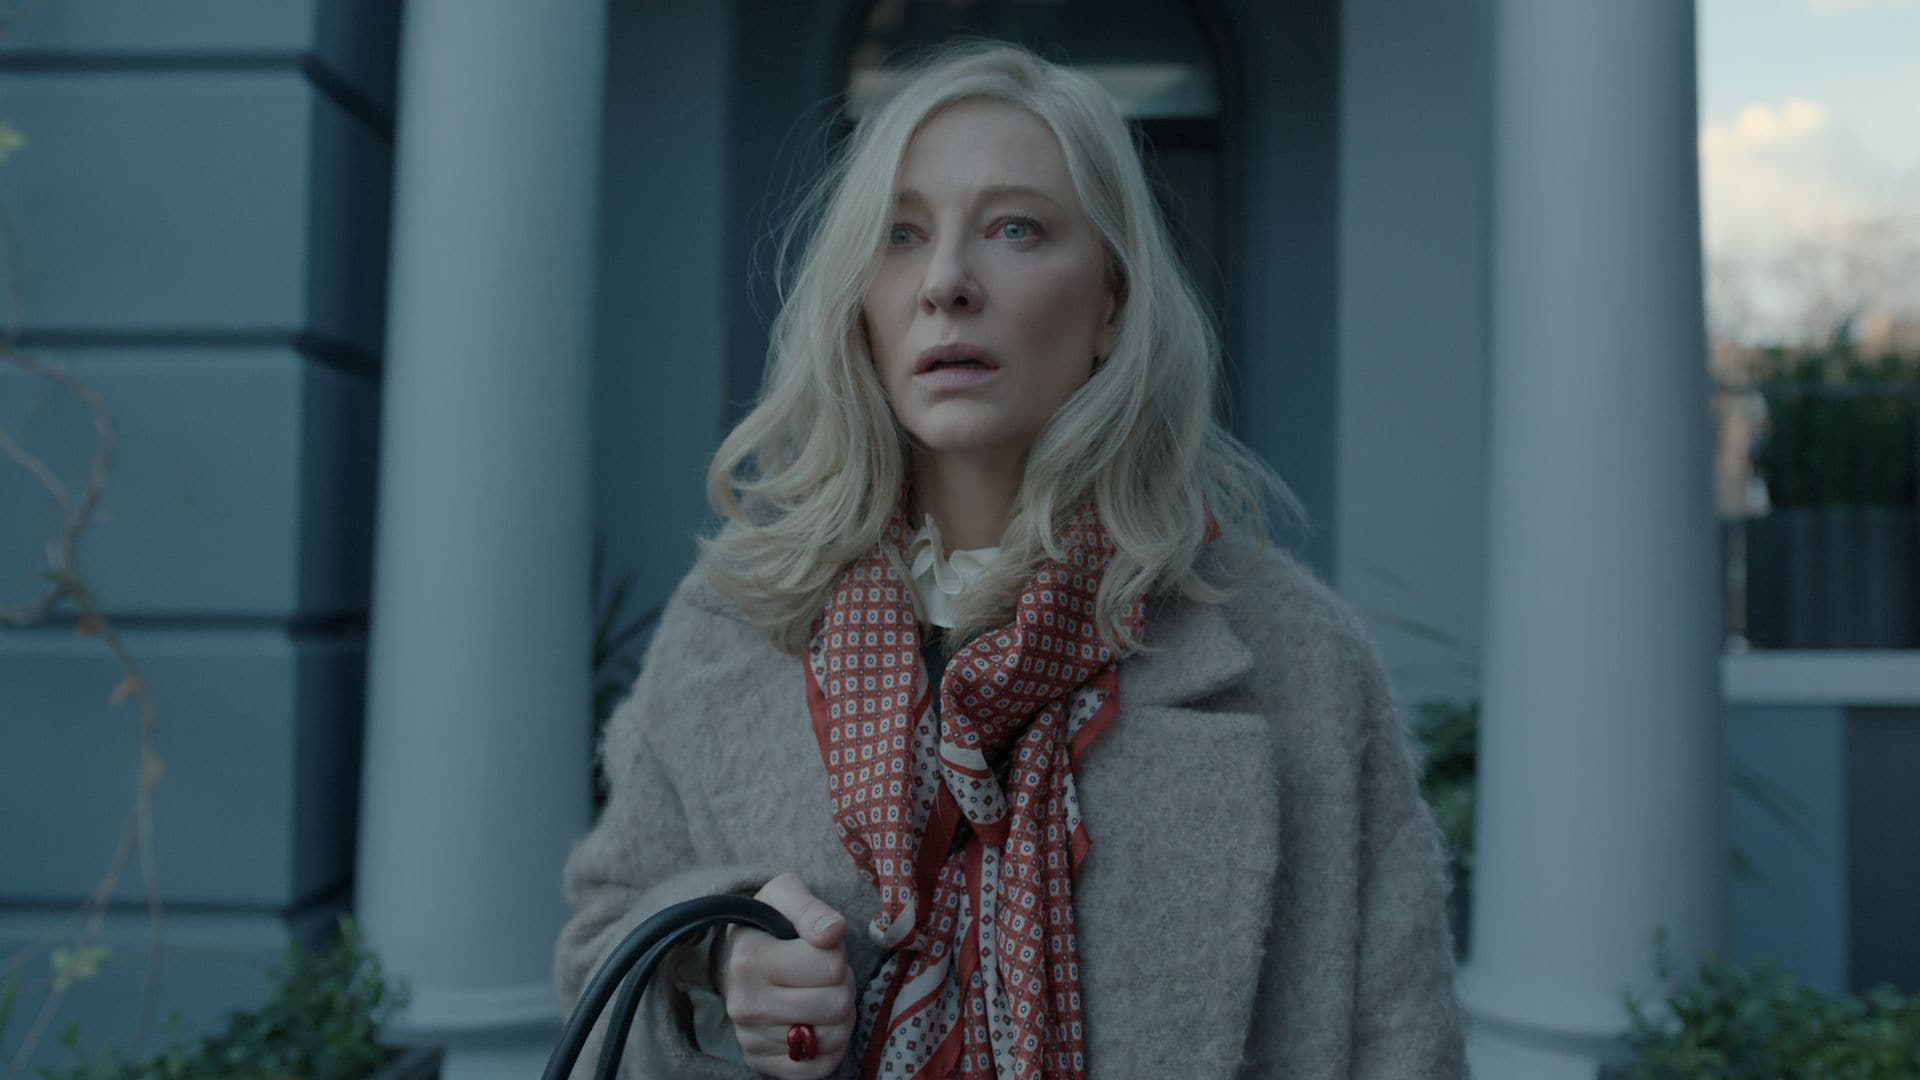 Alfonso Cuaron and Cate Blanchett share first look at 'Disclaimer', their new thriller